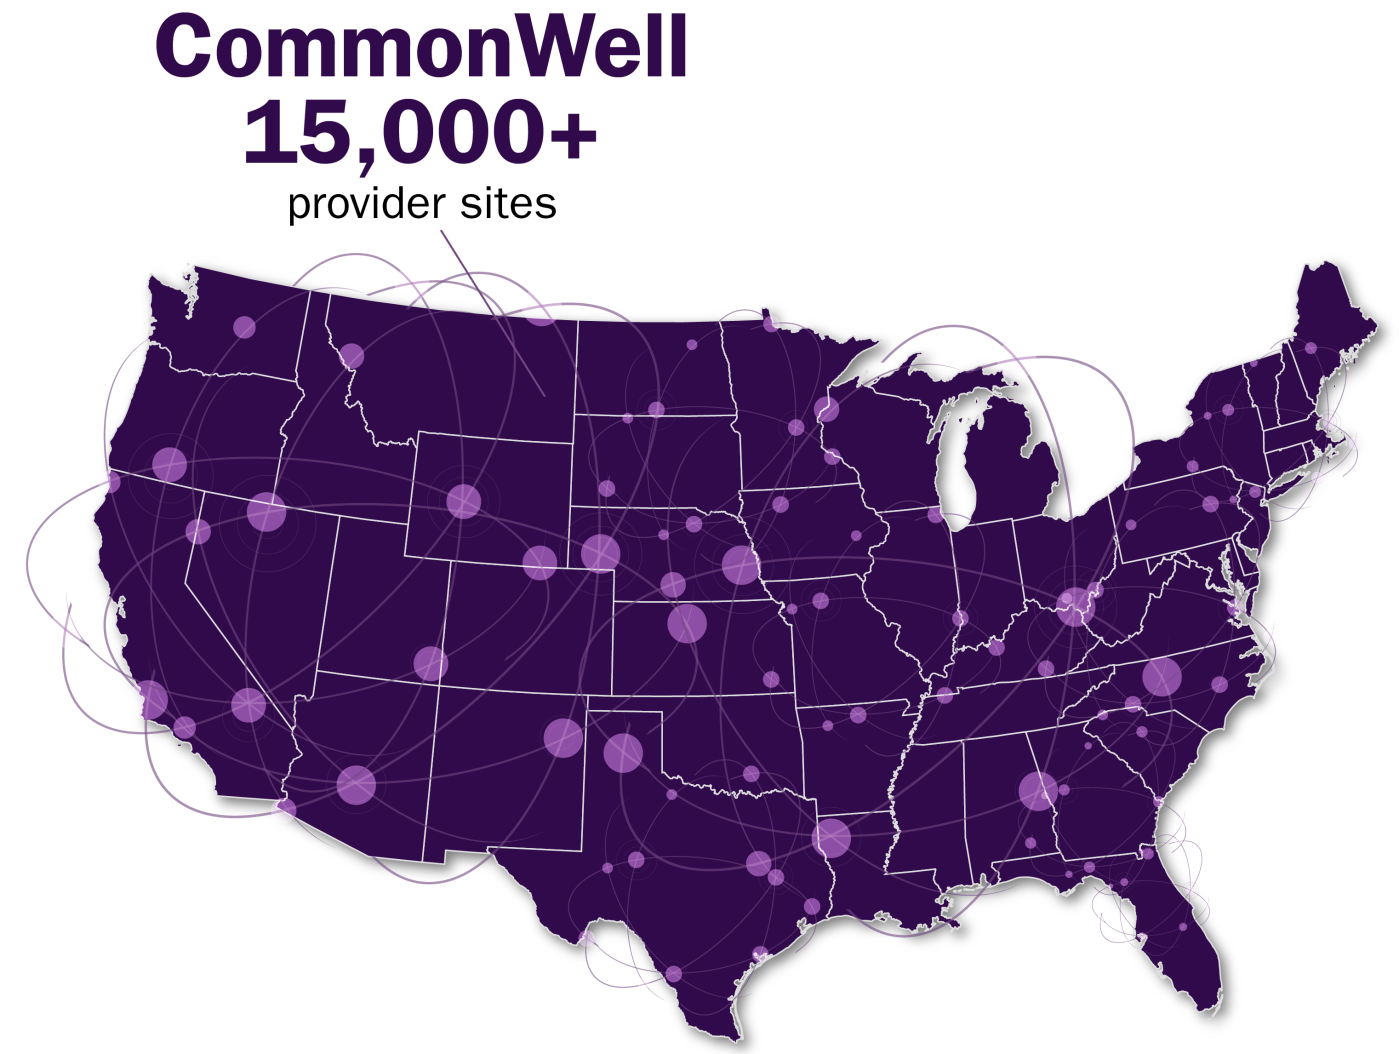 CommonWell added to network locations